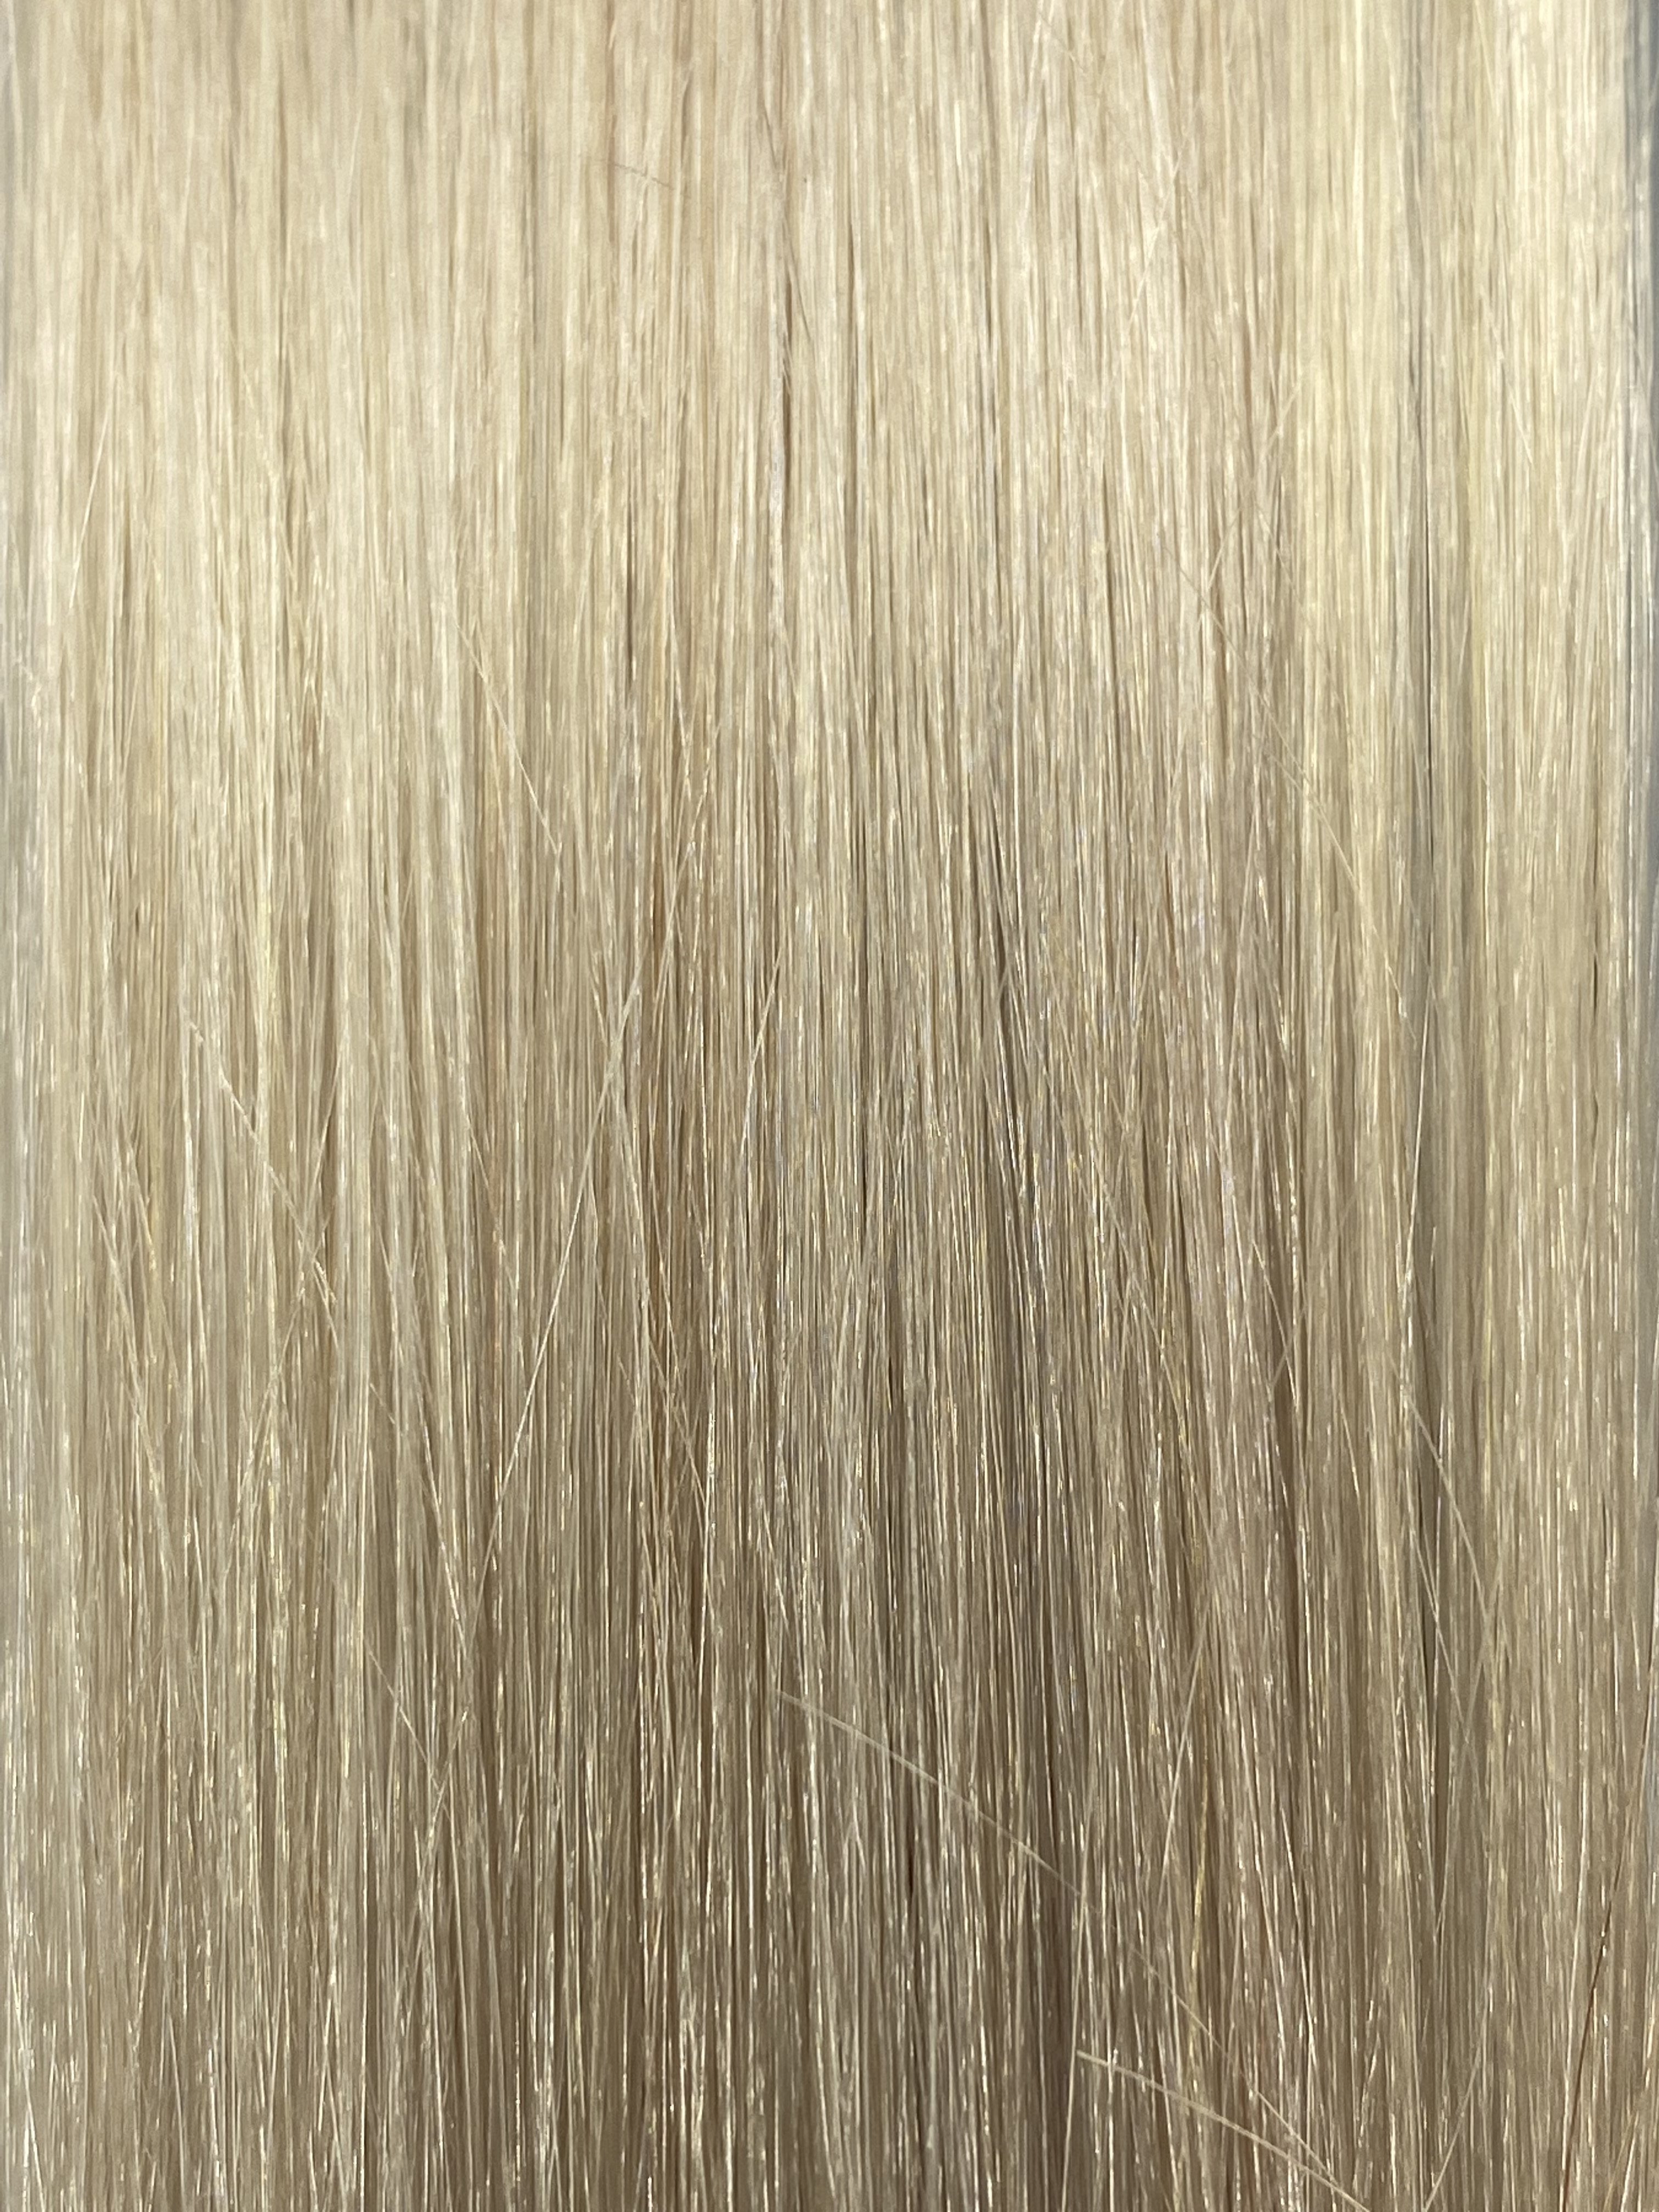 FUSION #1004 ULTRA VERY LIGHT PLATINUM BLONDE 50CM/ 20 INCHES  -  20 GRAMS